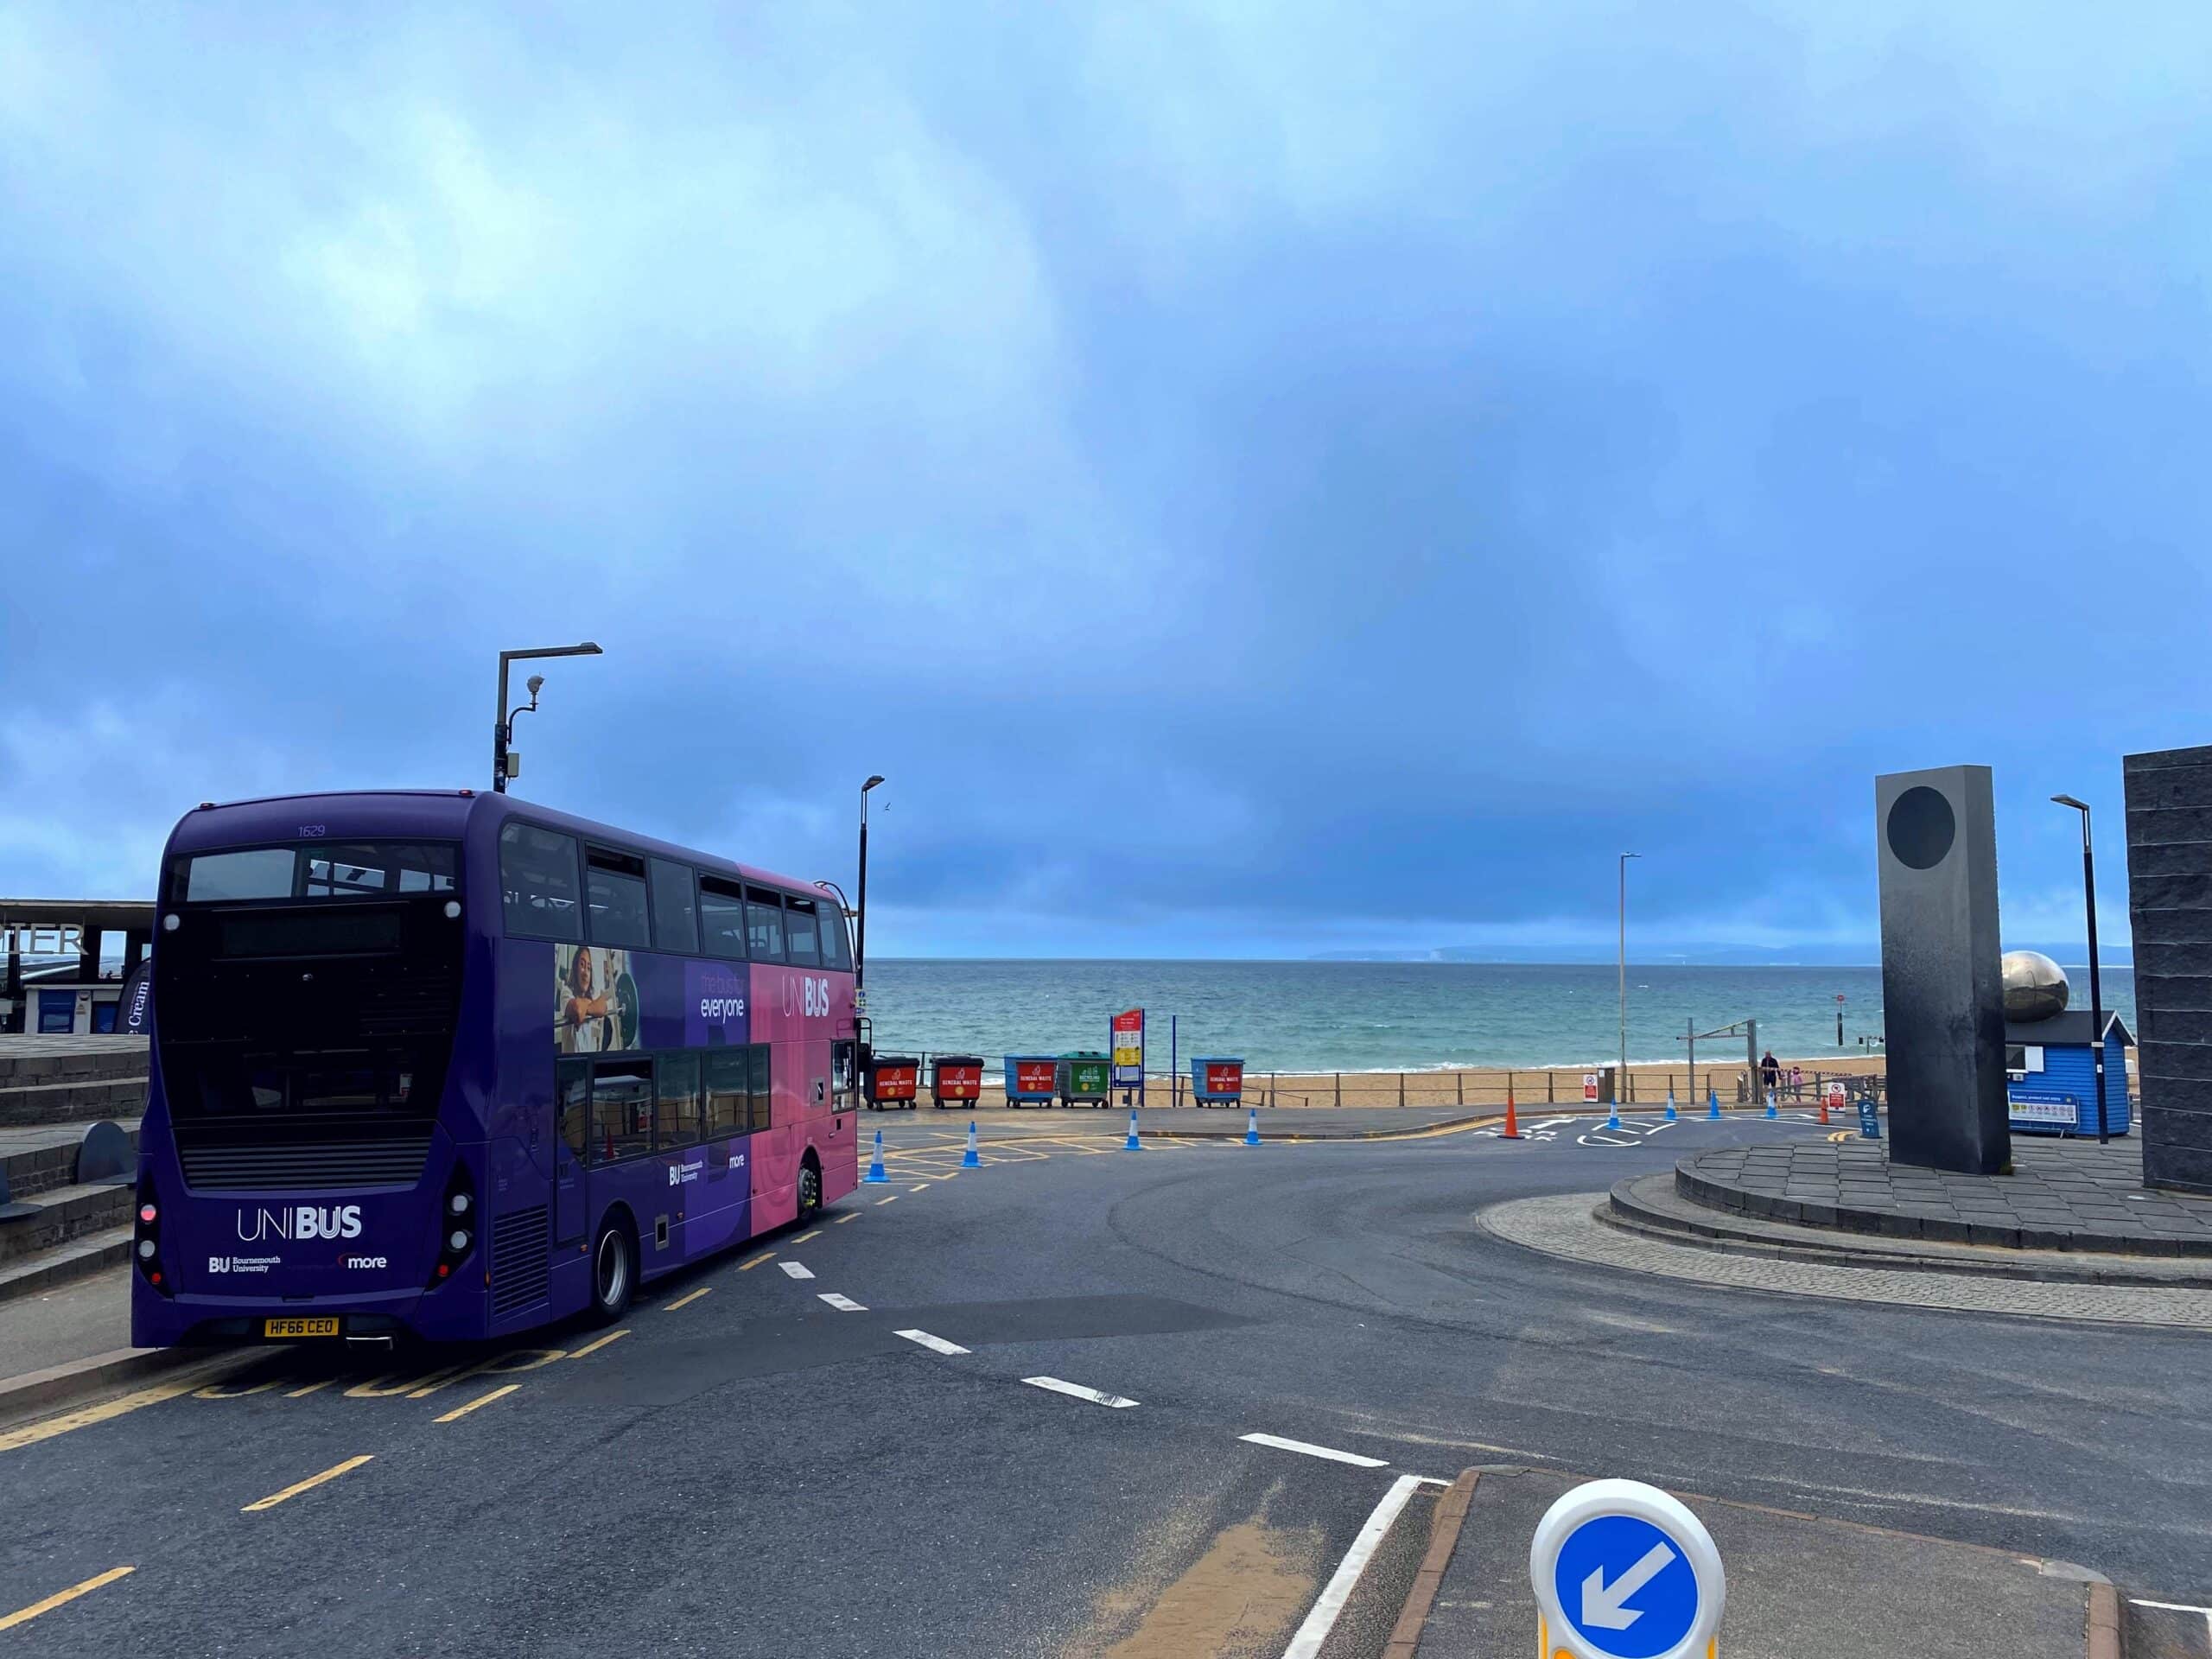 A double-decker bus at the bus stop next to Boscombe Pier in Bournemouth. A view of an empty beach and the sea are in the background.